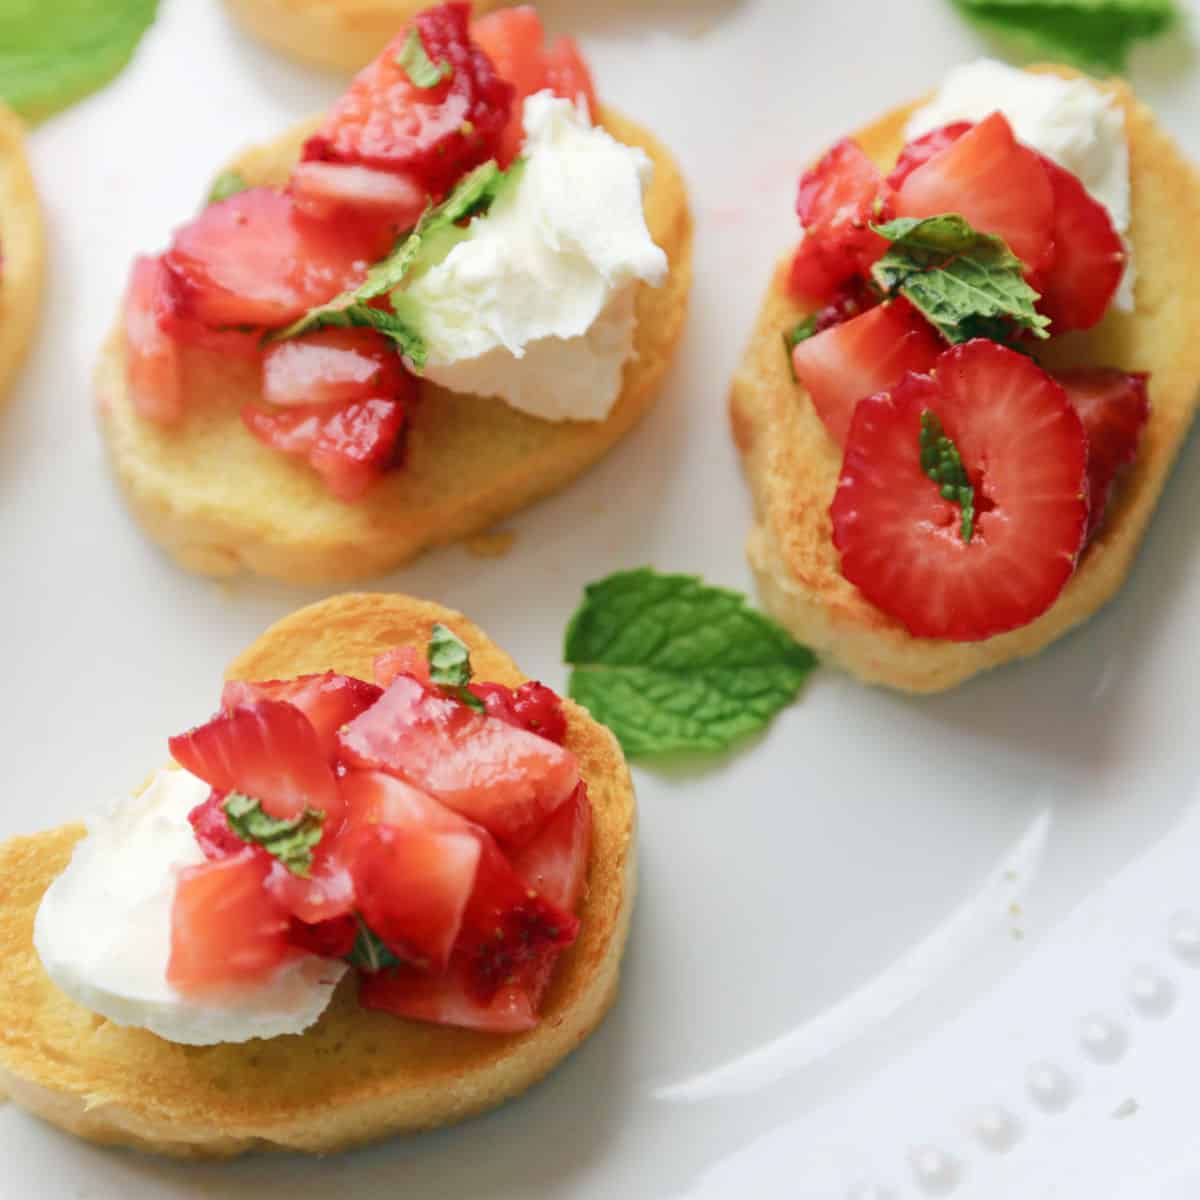 Slices of strawberry bruschetta on a white serving dish with mint leaves